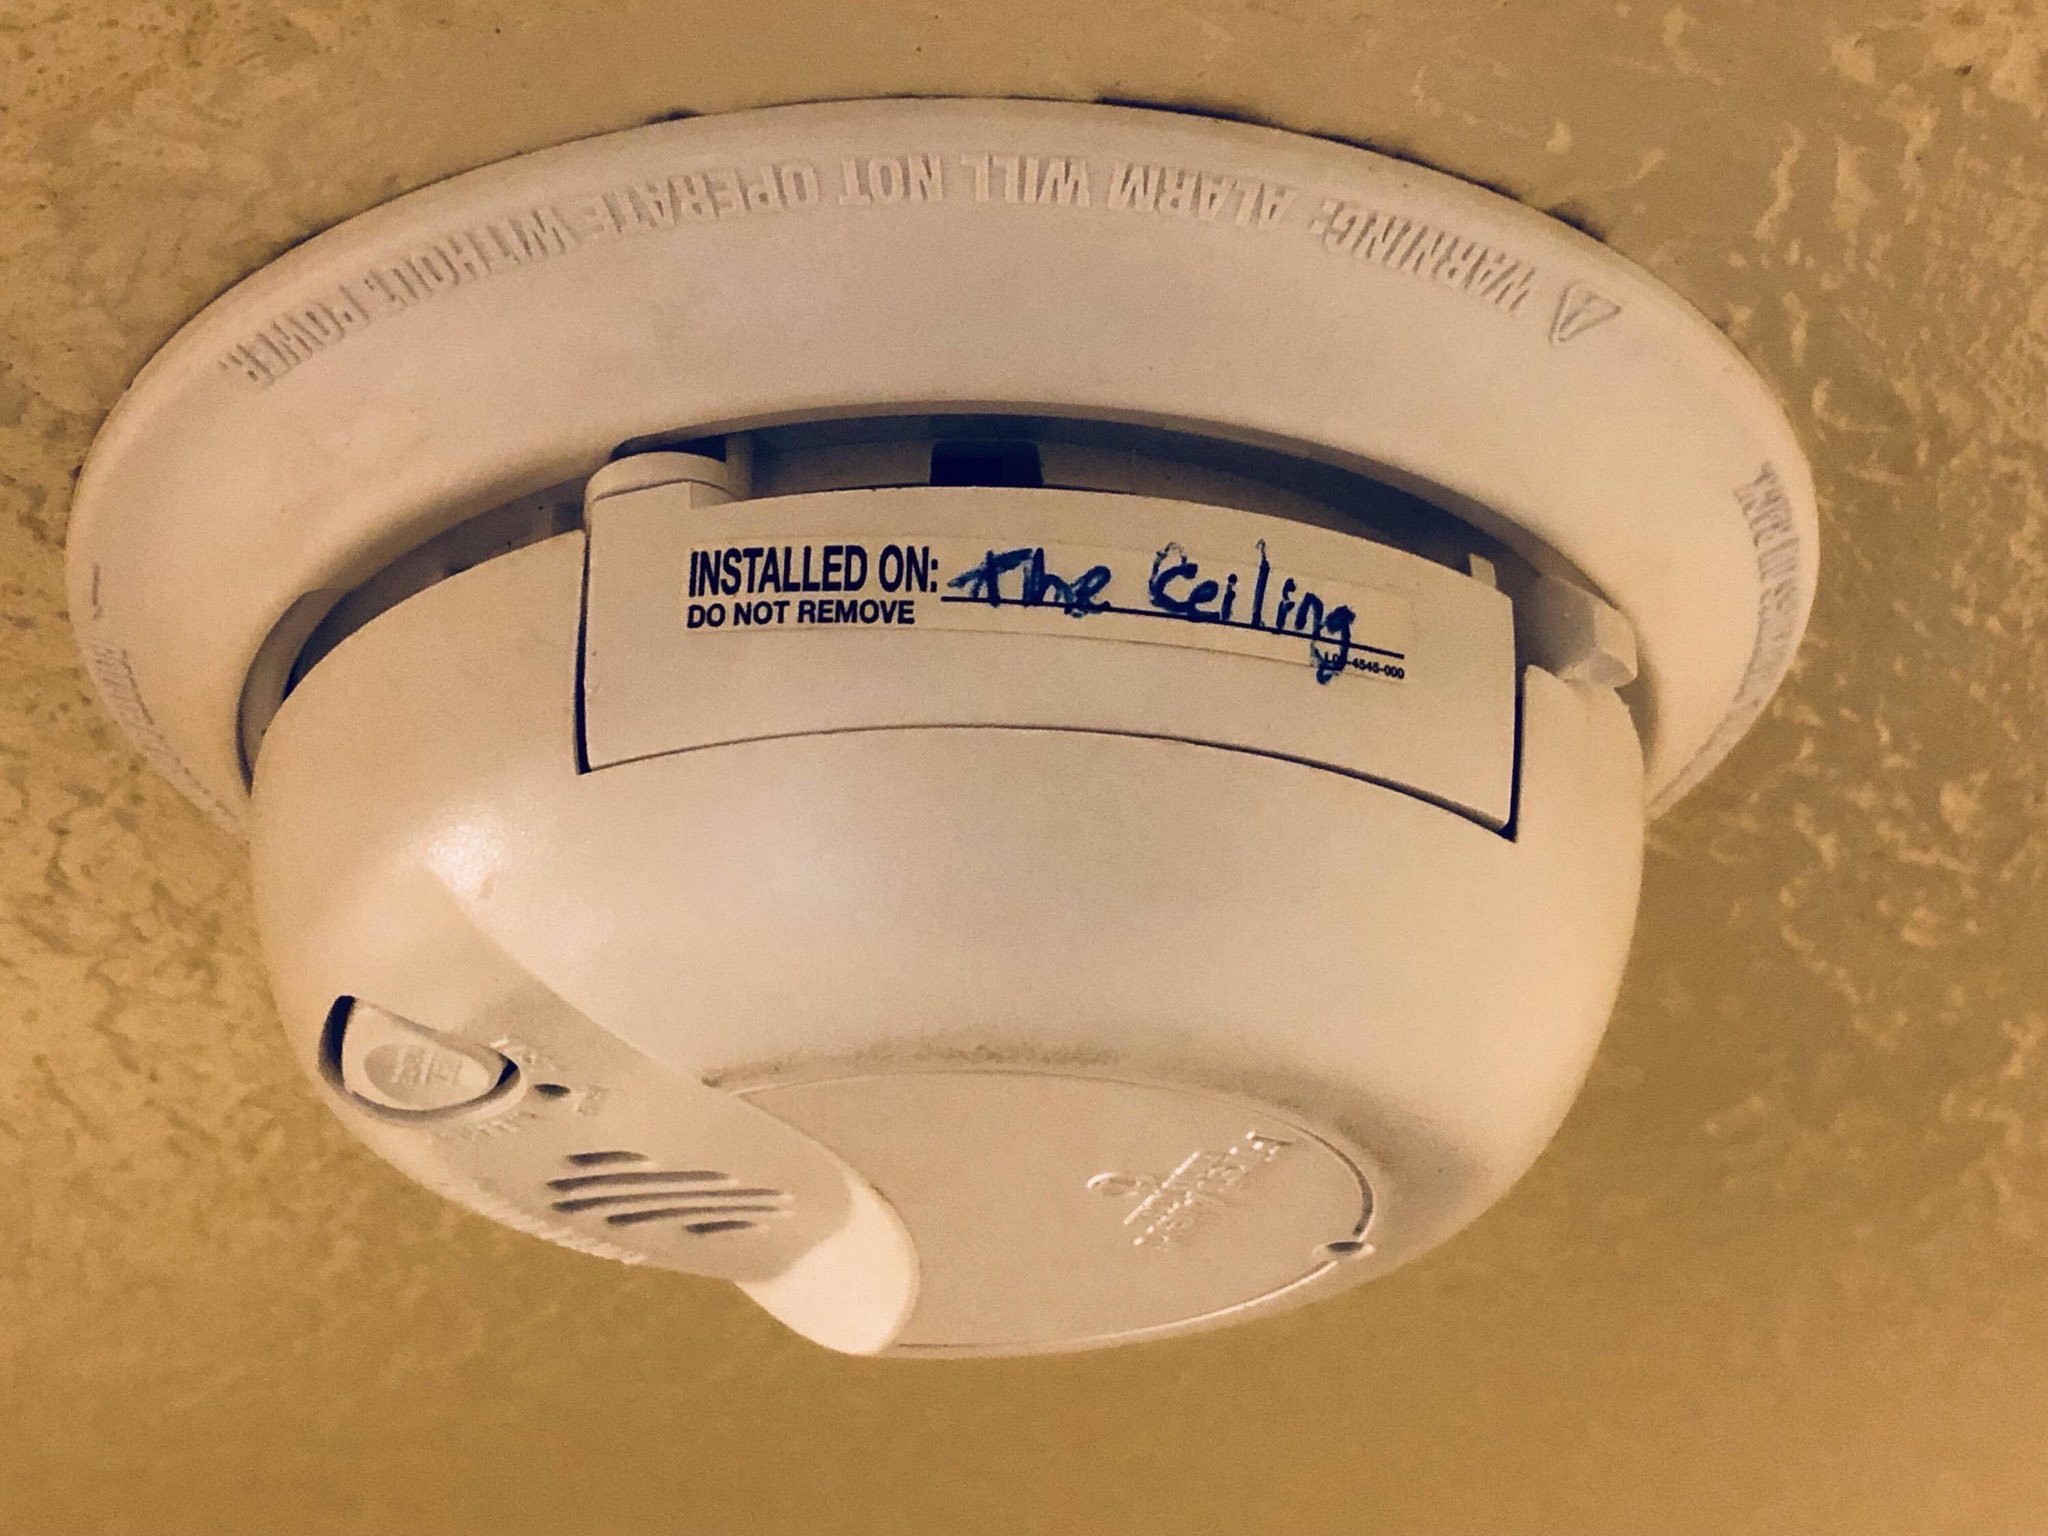 you had one job carl - Www Don Installed On Do Not Remove Installed On he Ceiling